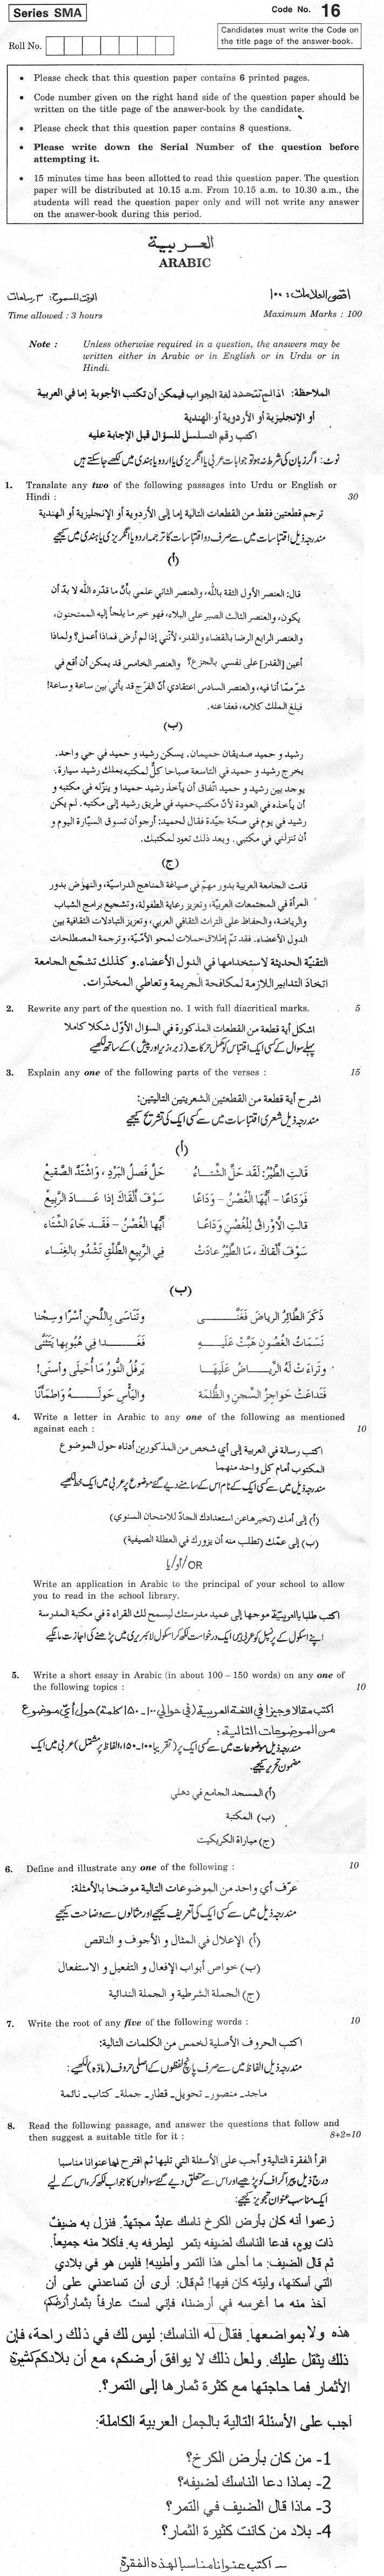 CBSE Class XII Previous Year Question Paper 2012 Arabic